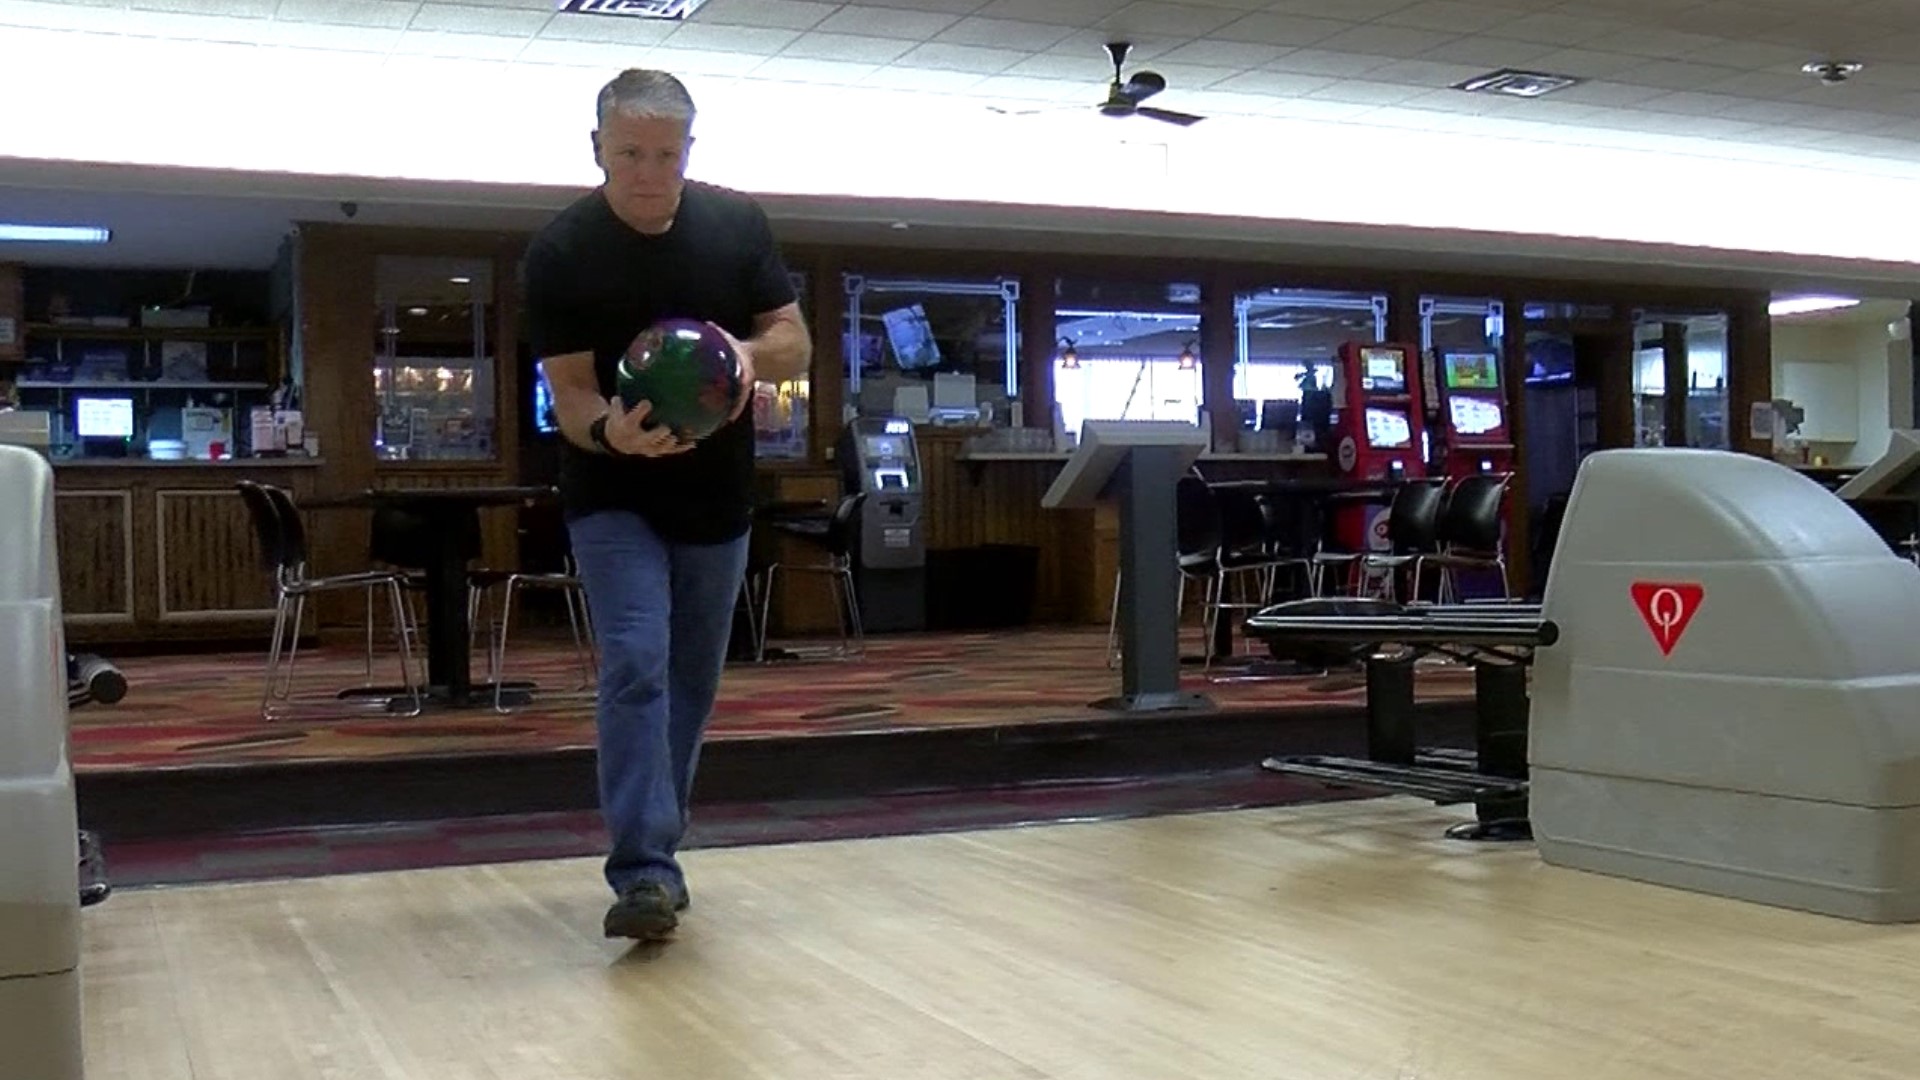 Ken Alexander bowled his first 300 more than 30 years ago. On Wednesday night, he did it for the 100th time.